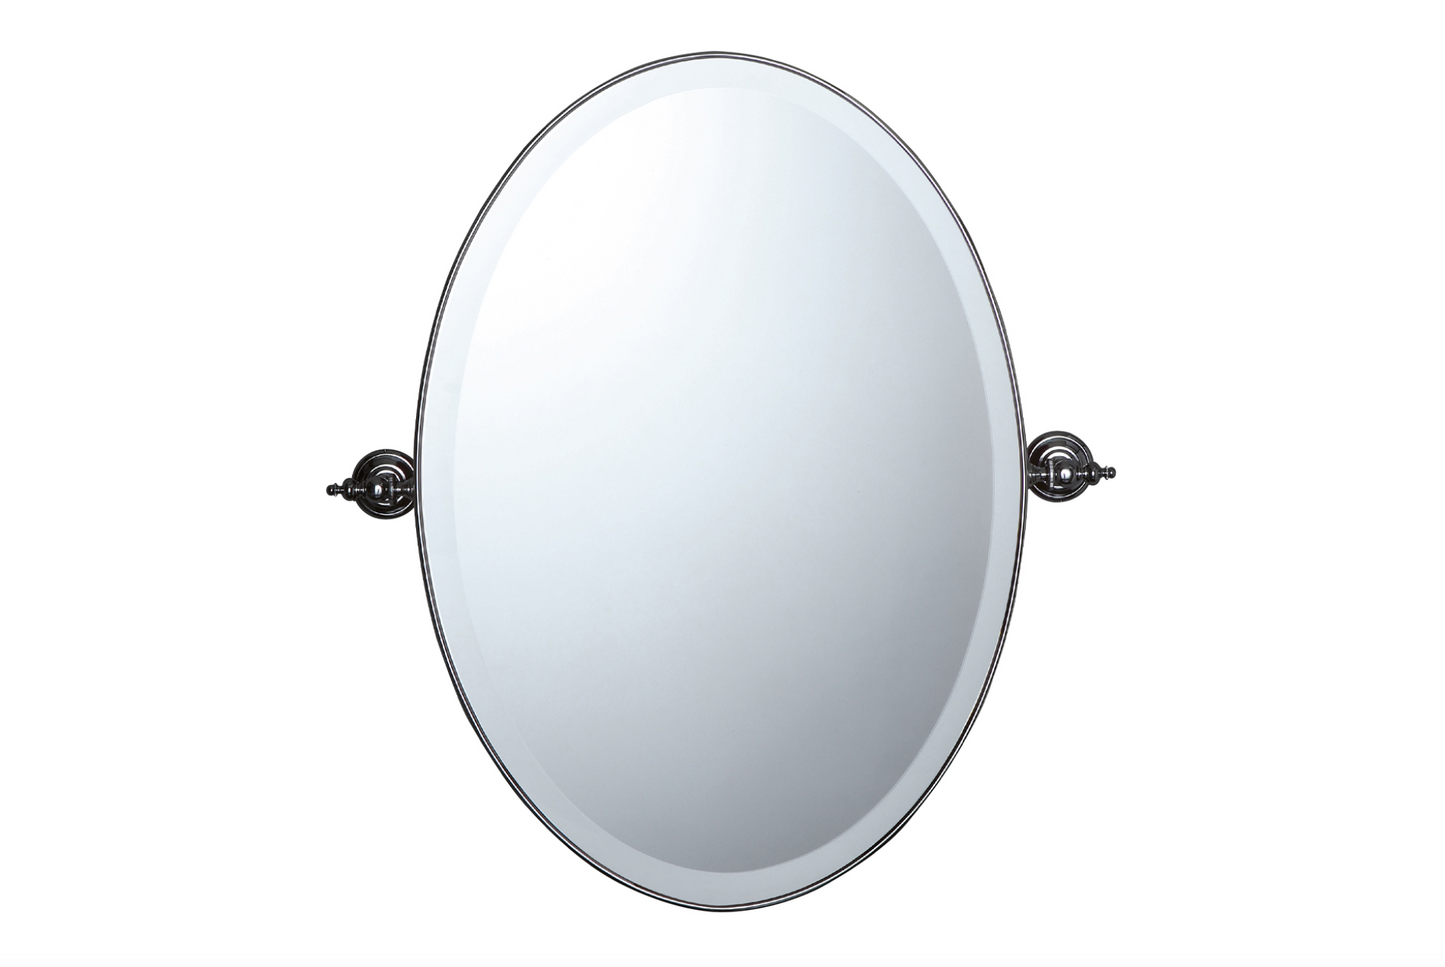 Tilting oval bathroom mirror with Classic style frame